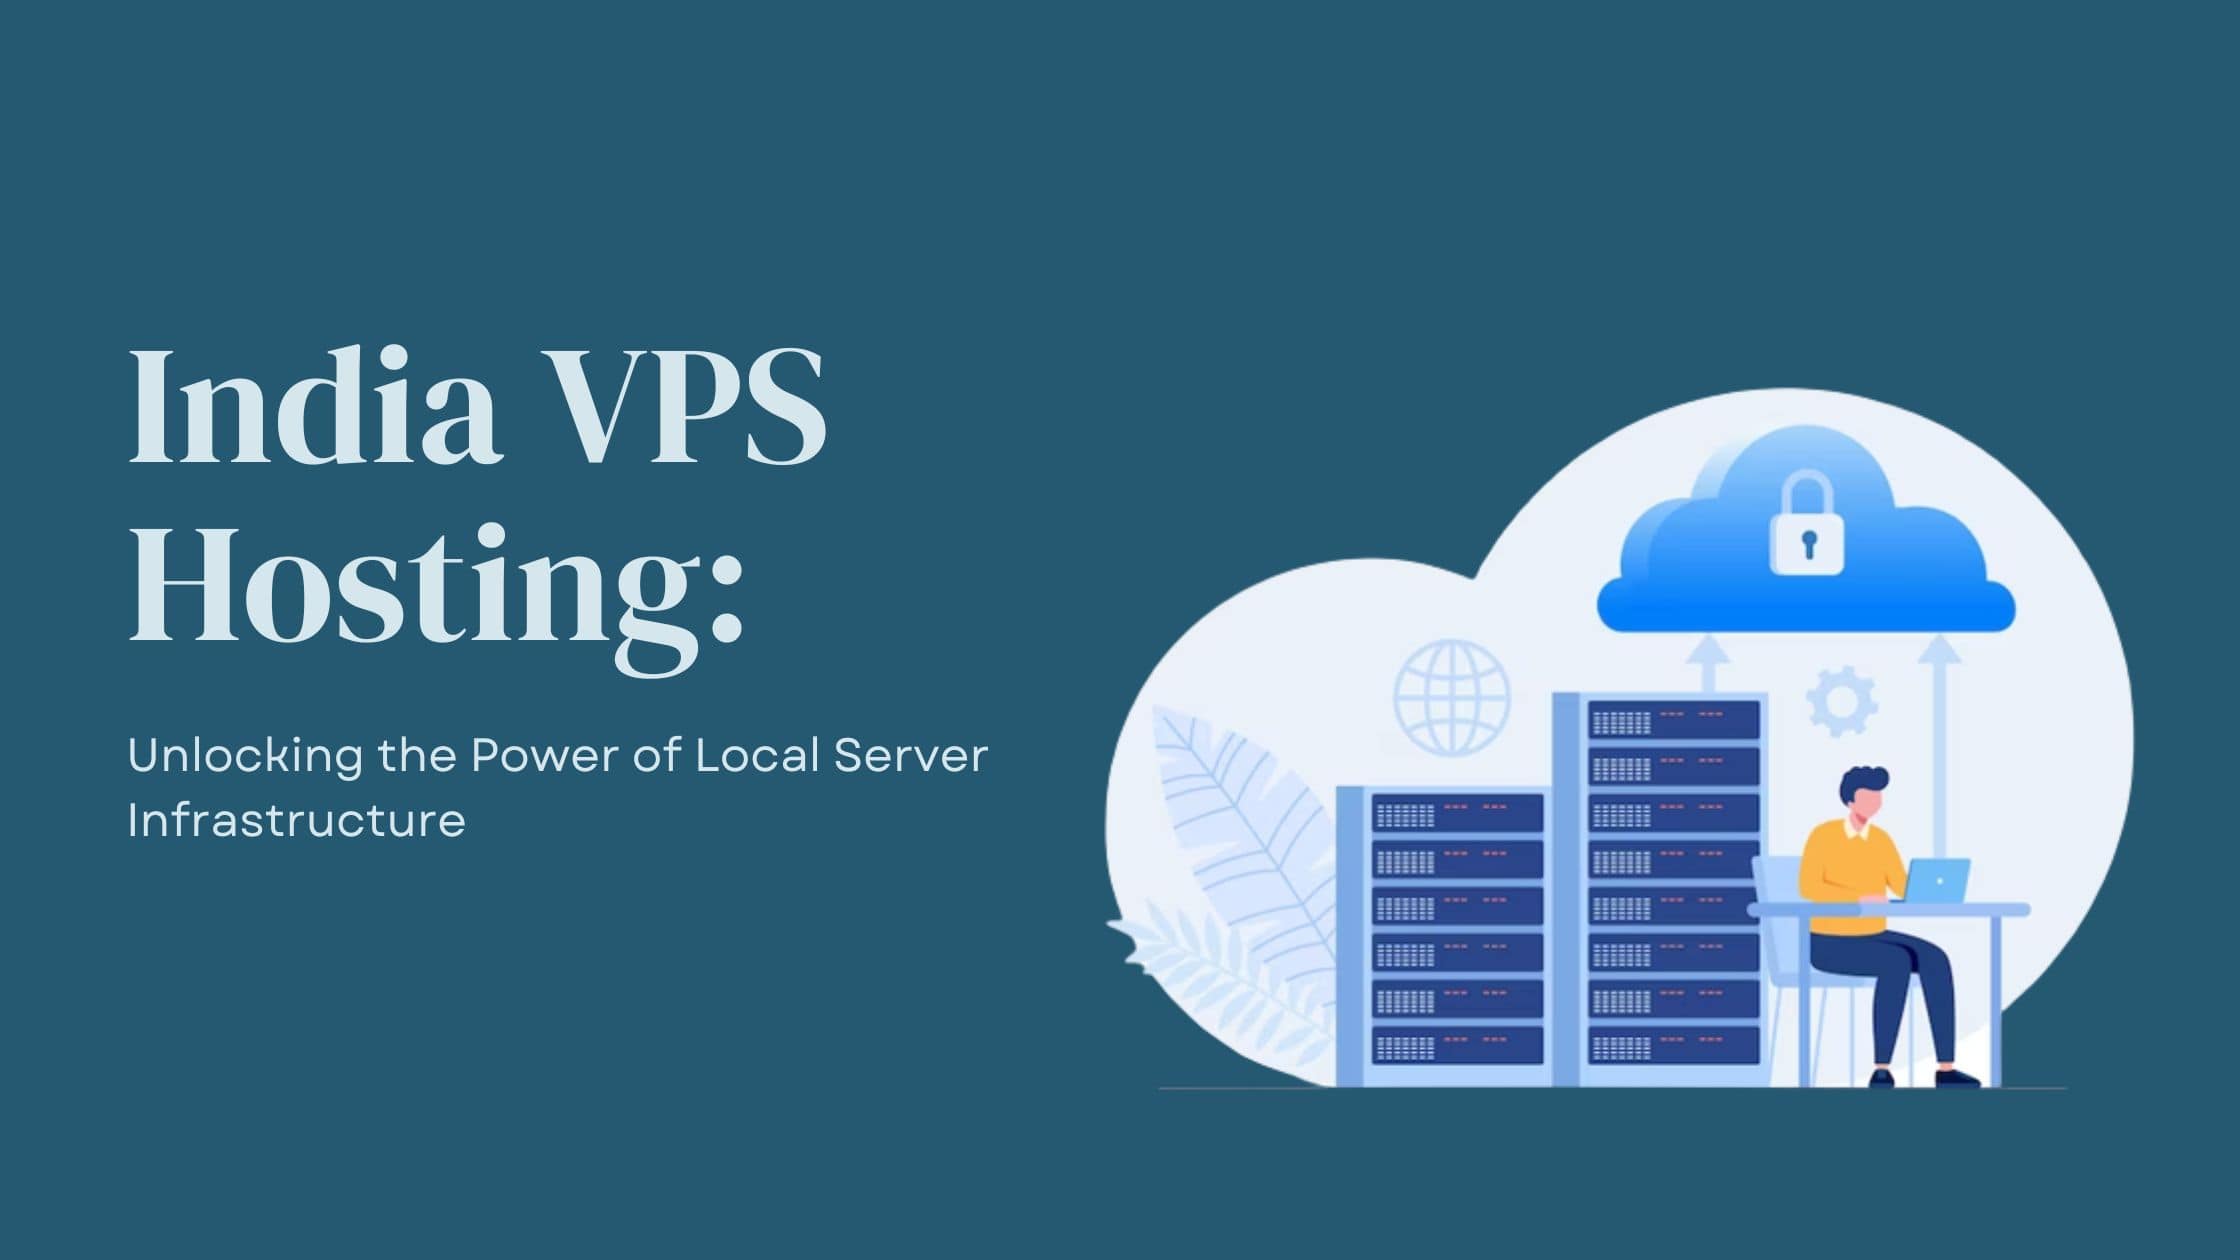 India VPS Hosting: Unlocking the Power of Local Server Infrastructure